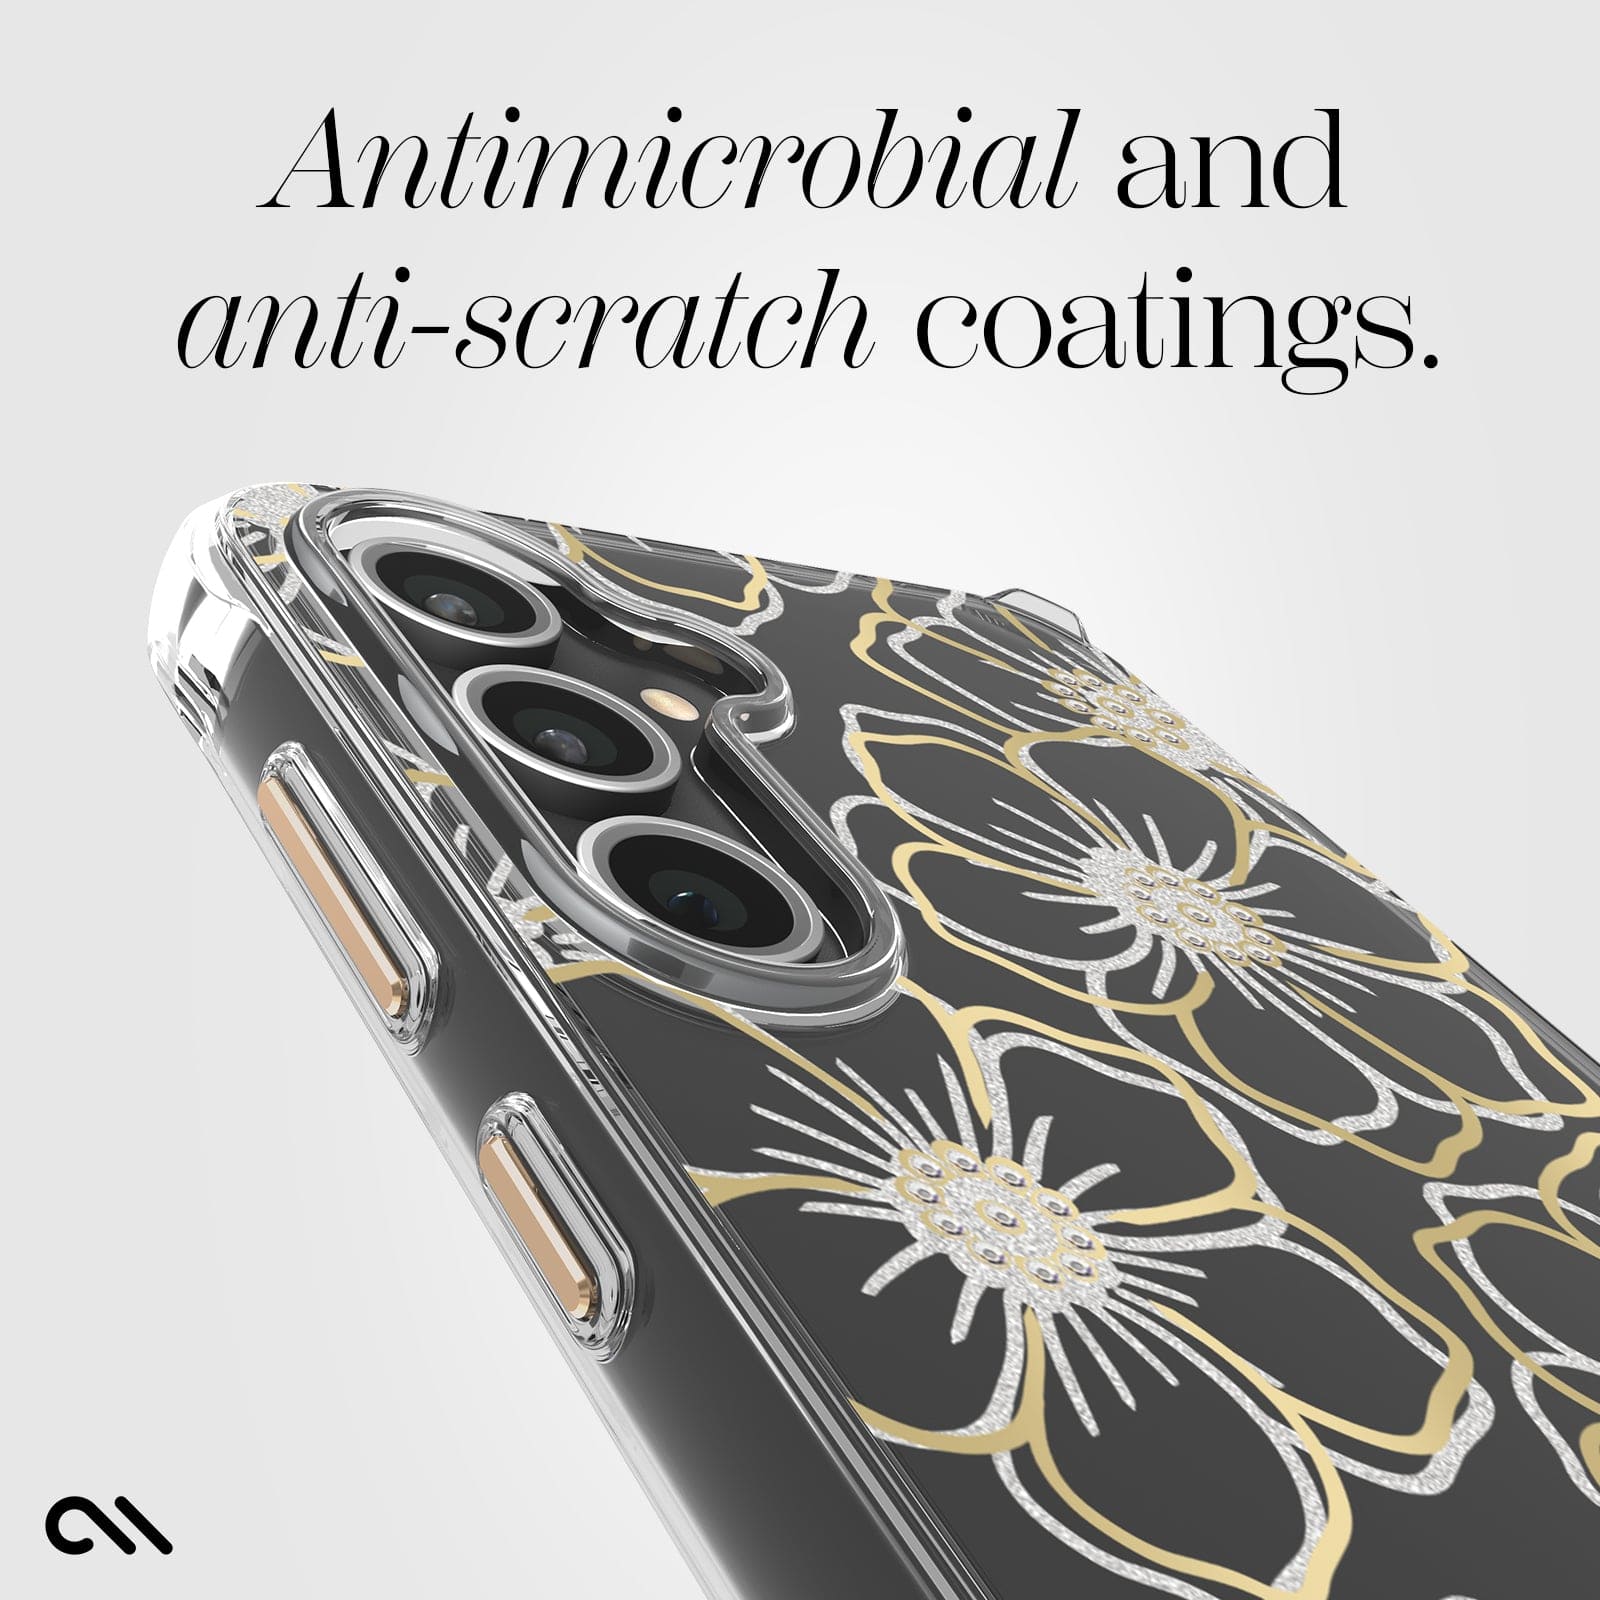 ANTIMICROBIAL AND ANTI-SCRATCH COATINGS